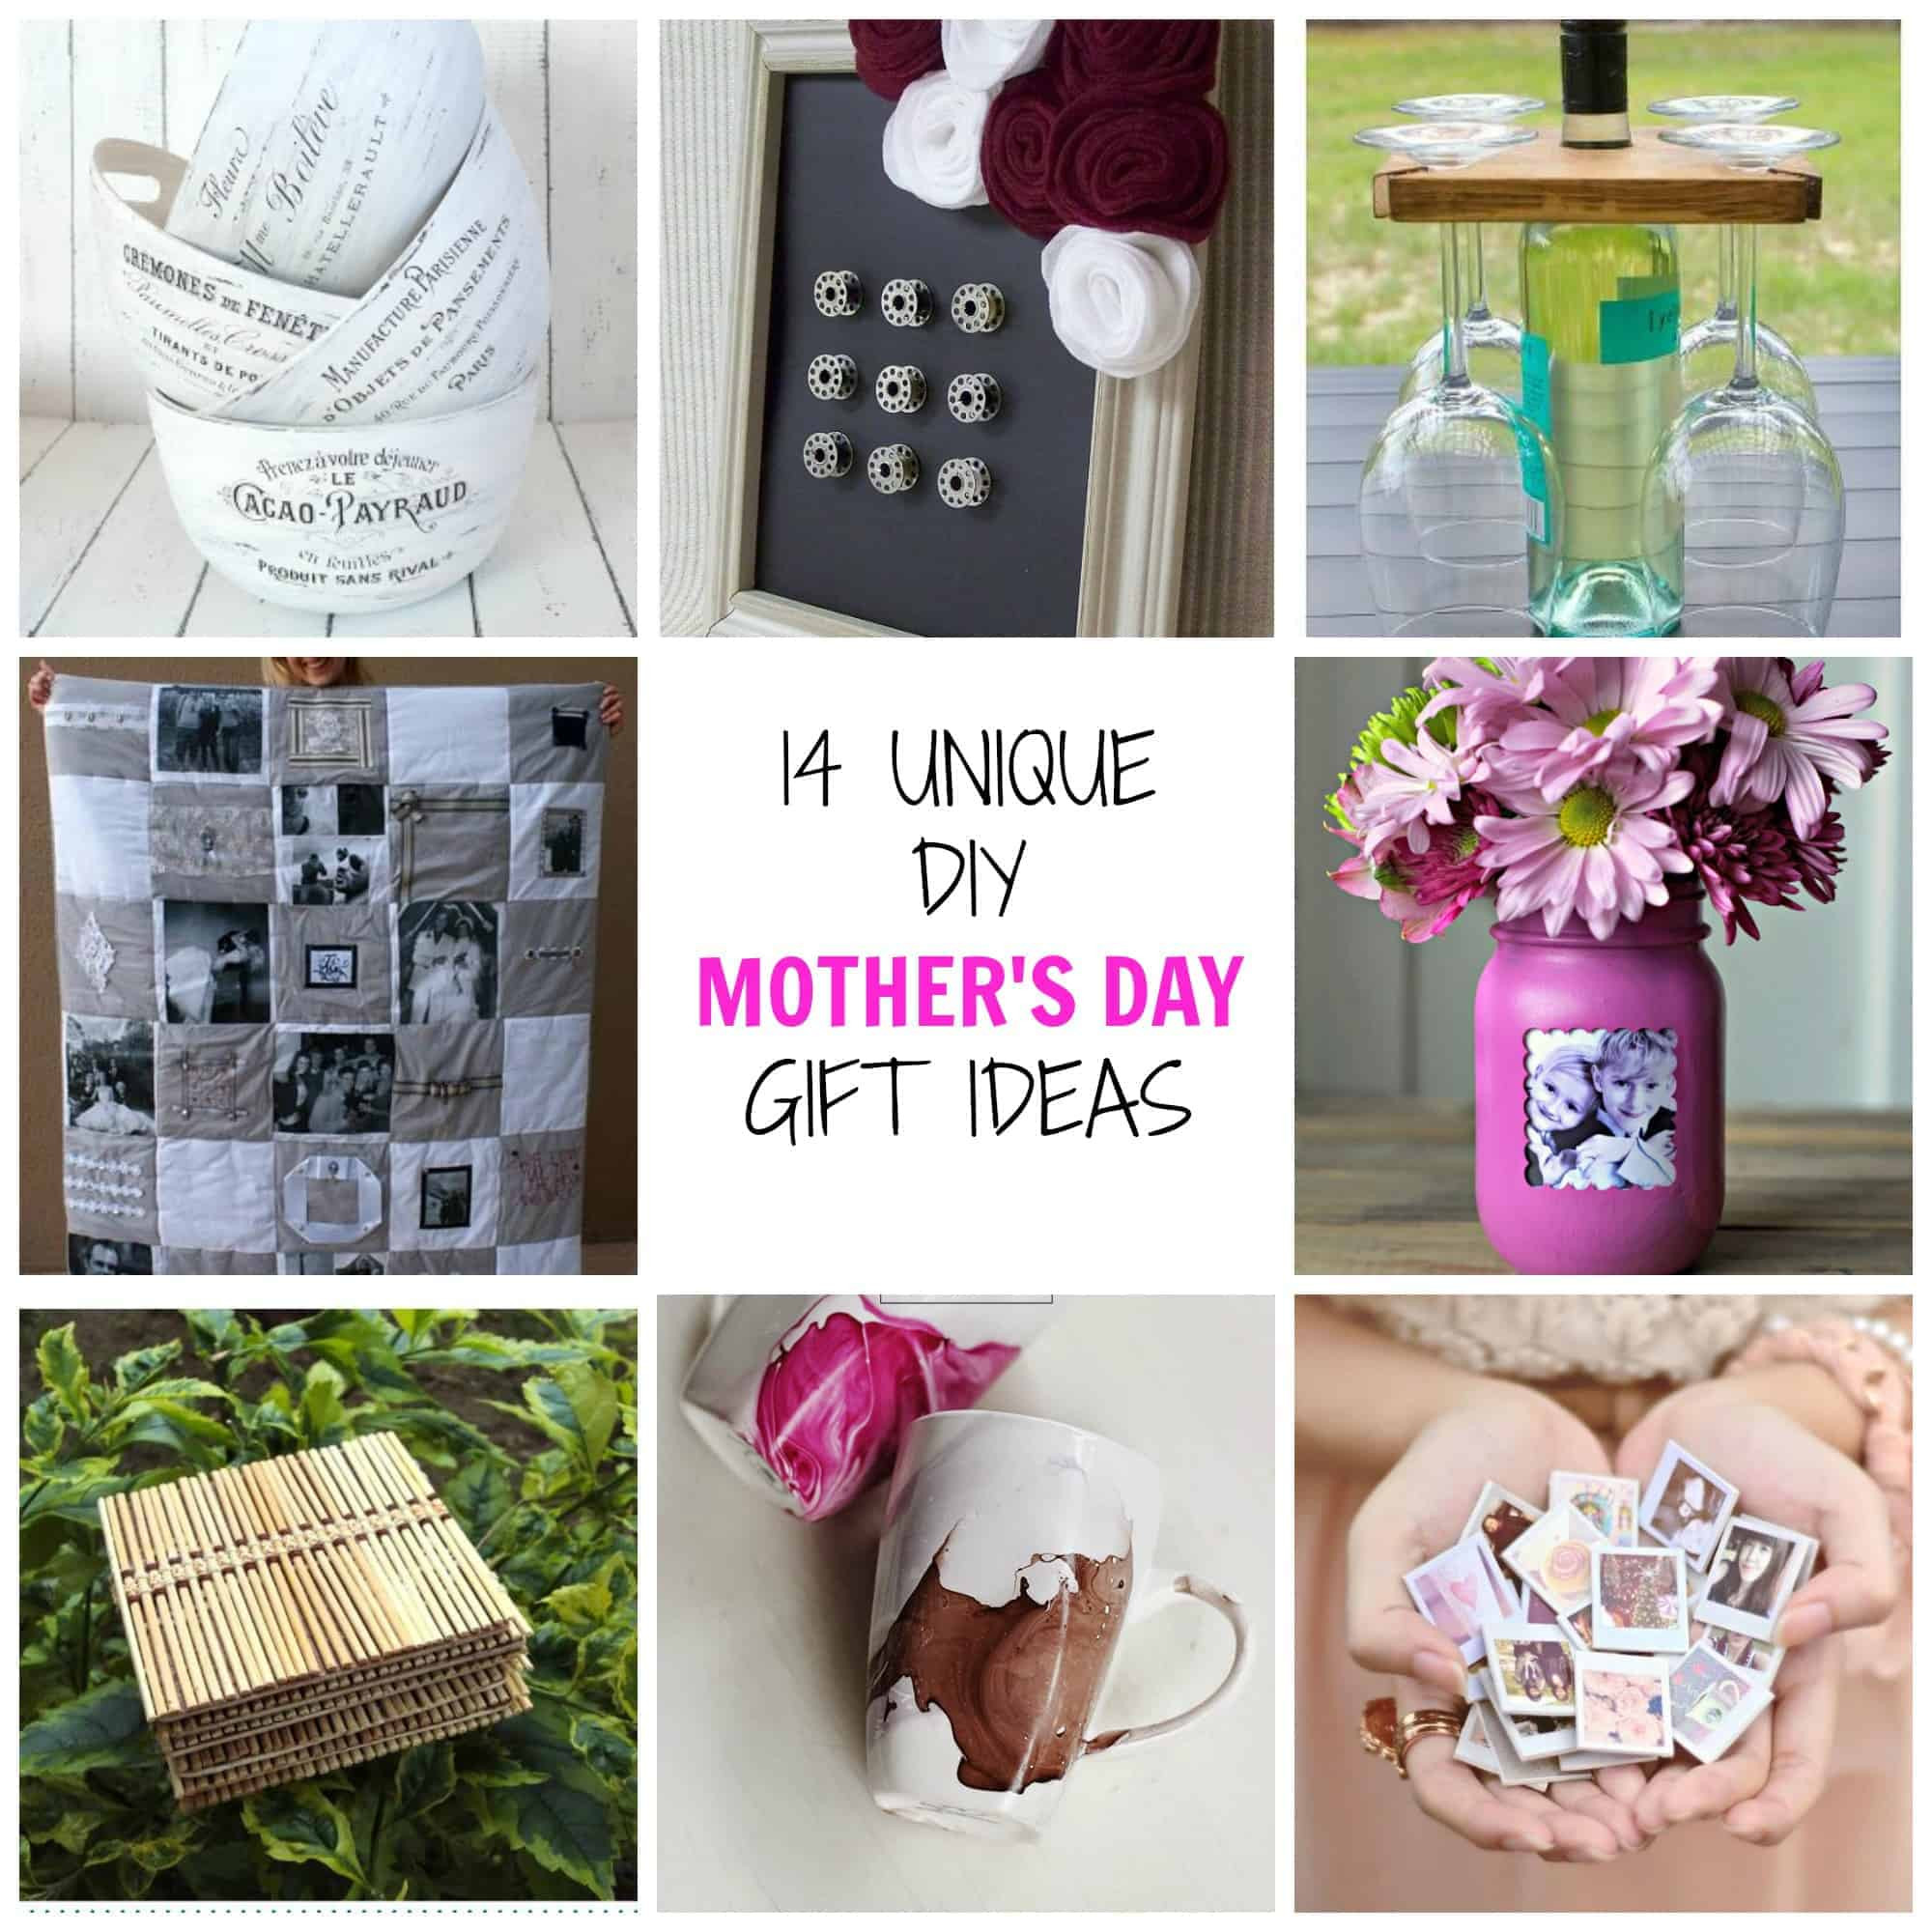 Mothers Day Gift Idears
 14 Unique DIY Mother s Day Gifts Simplify Create Inspire